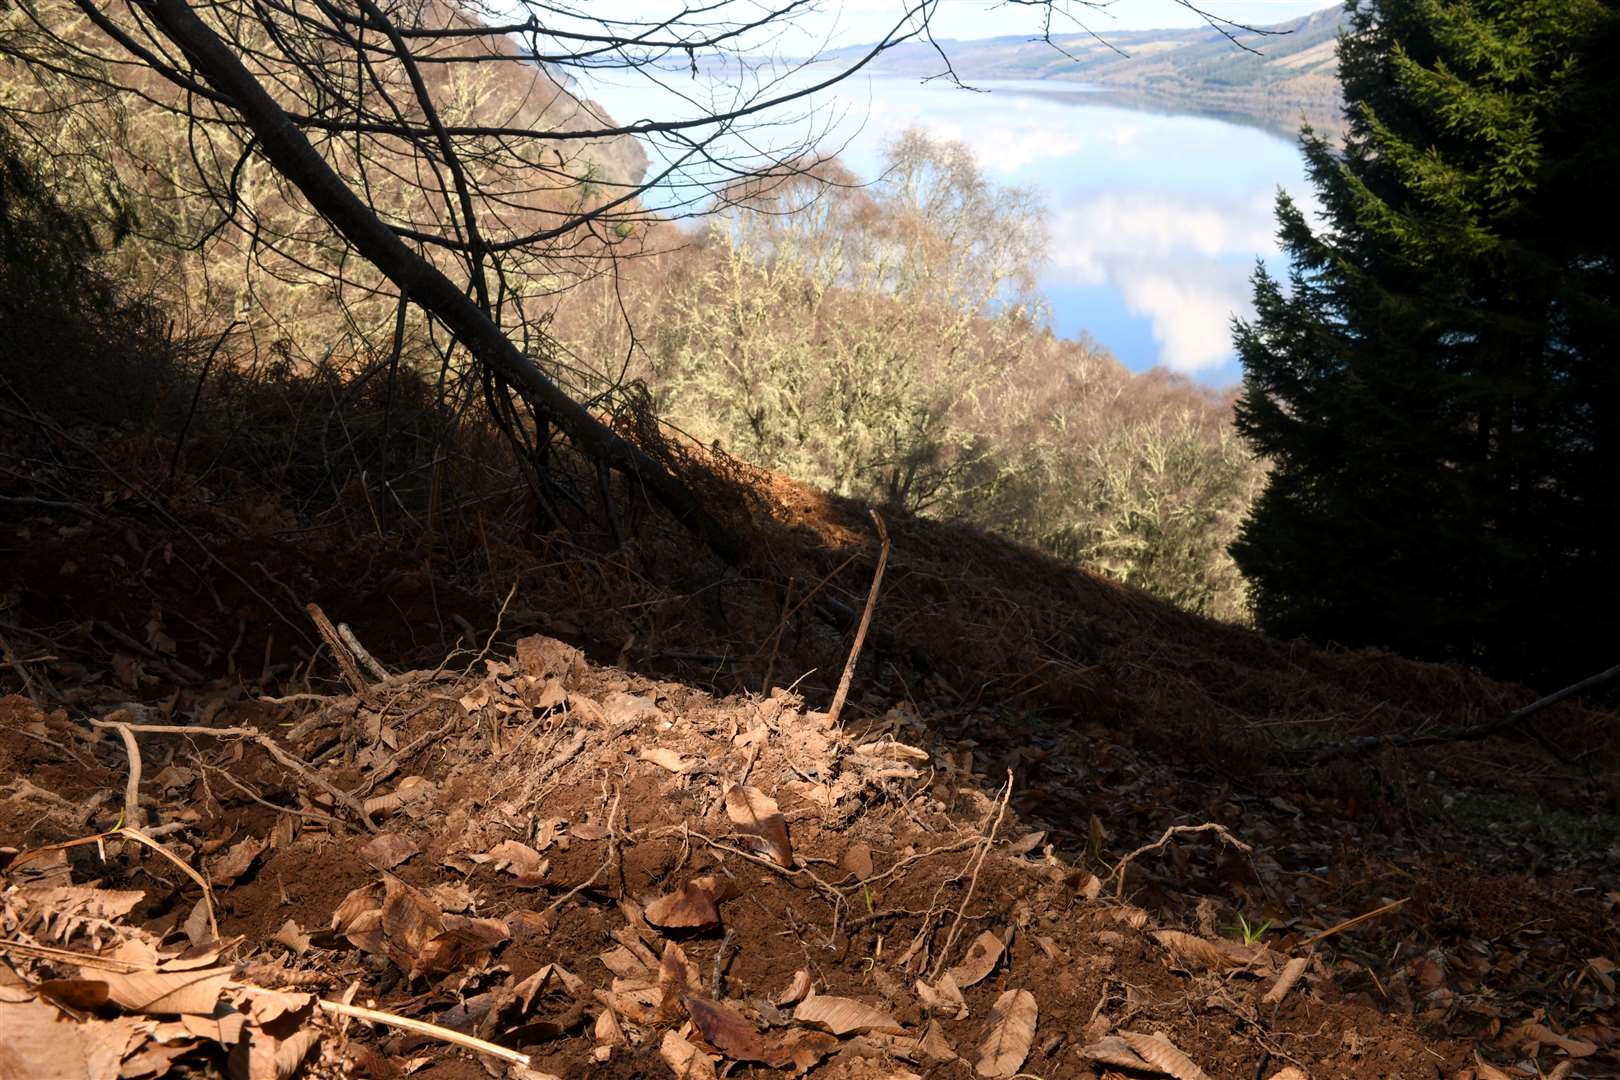 Residents believe there could be up to 5000 feral pigs roaming the area above Loch Ness. Picture: James Mackenzie.